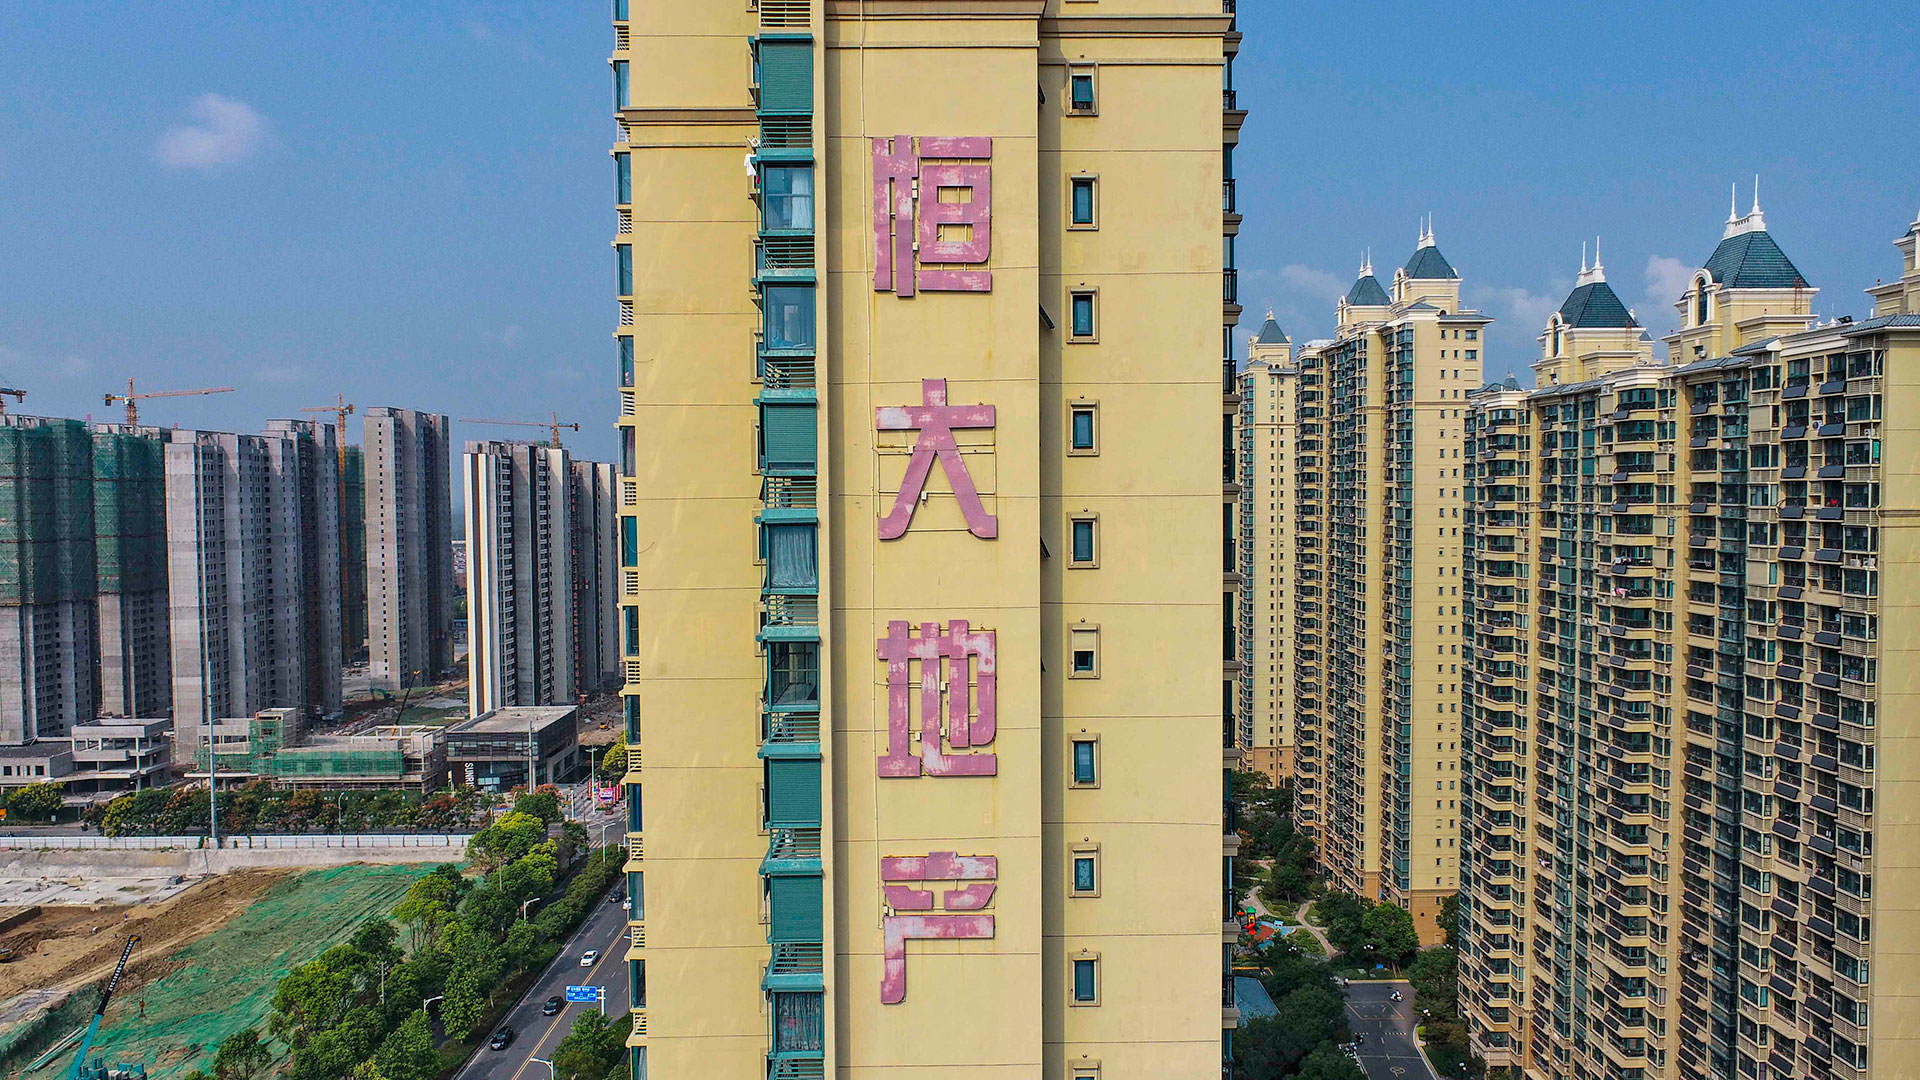 Immobilienentwicklung durch die Evergrande Group in Huai 'an, China | picture alliance / Zhao Qirui / 